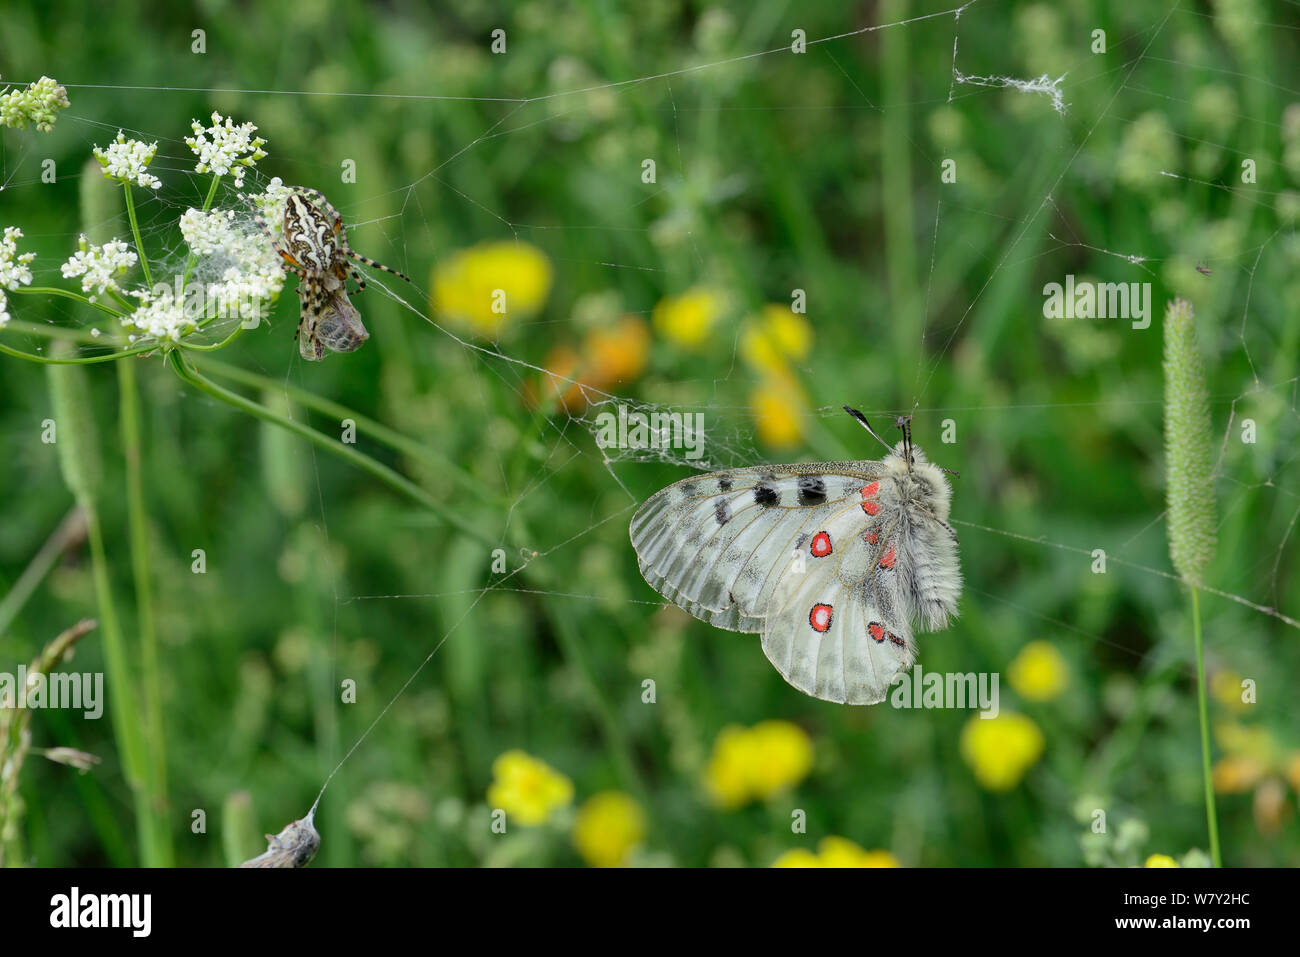 Apollo (Parnassius apollo) caught in webs of Oak spider (Aculepeira ceropegia) which is feeding on bee, Col du Lombardie, Isola village, Mercantour National Park, Provence, France, July, July. Stock Photo